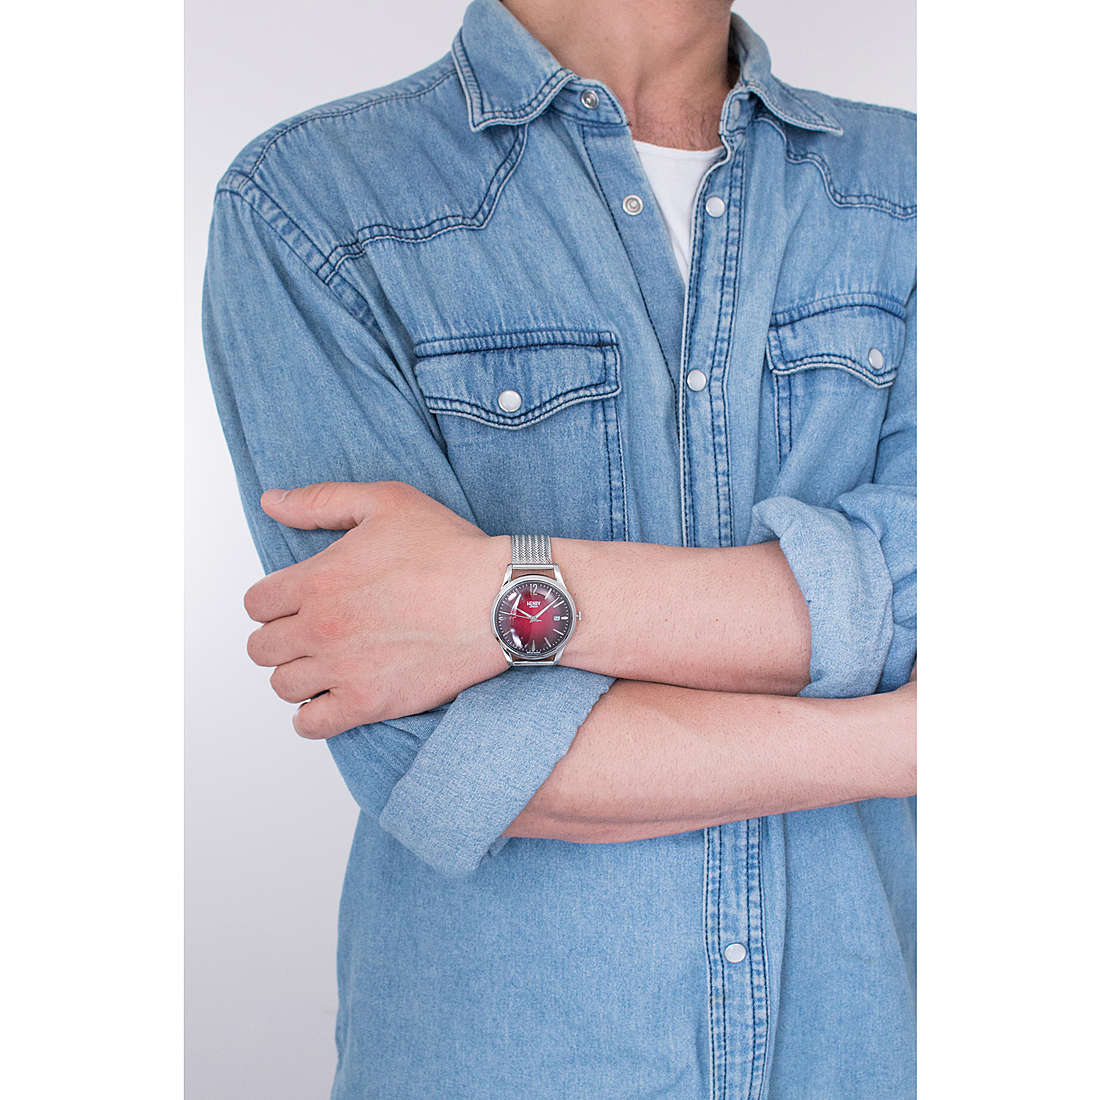 Henry London only time Chancery man HL39-M-0097 wearing